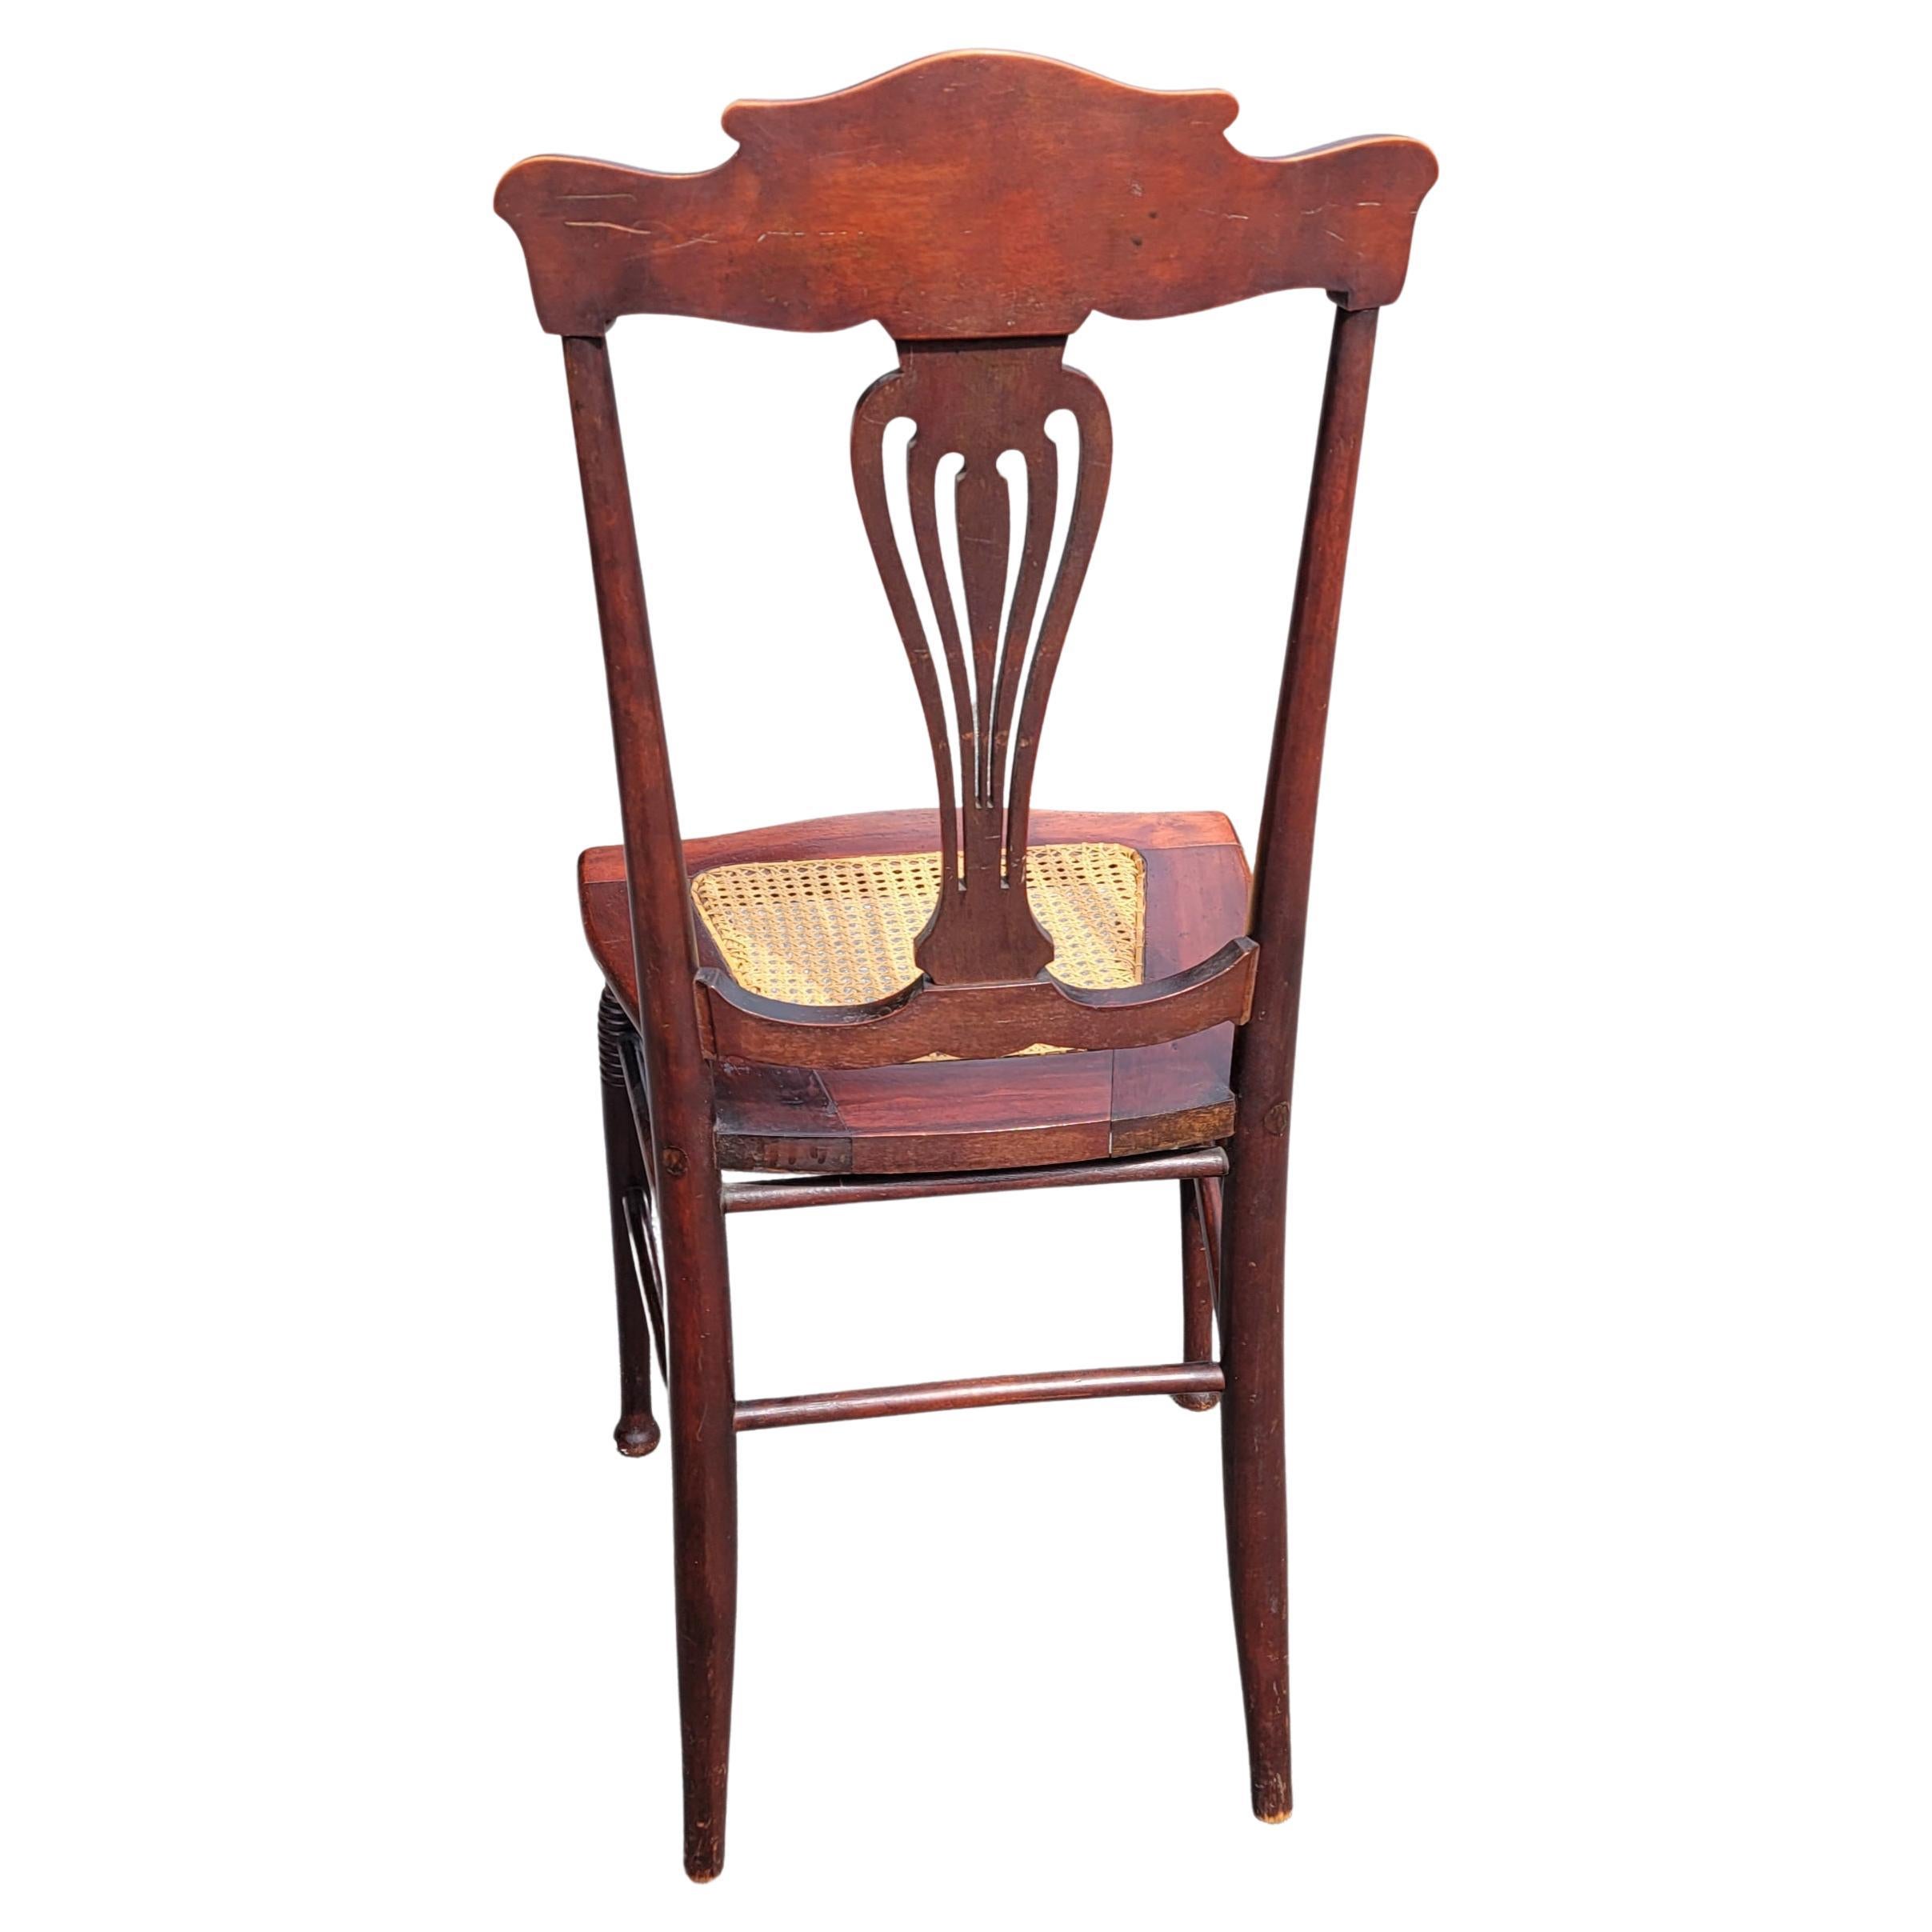 Refinished Early American Empire Mahogany and Cane Seat Chair For Sale 3